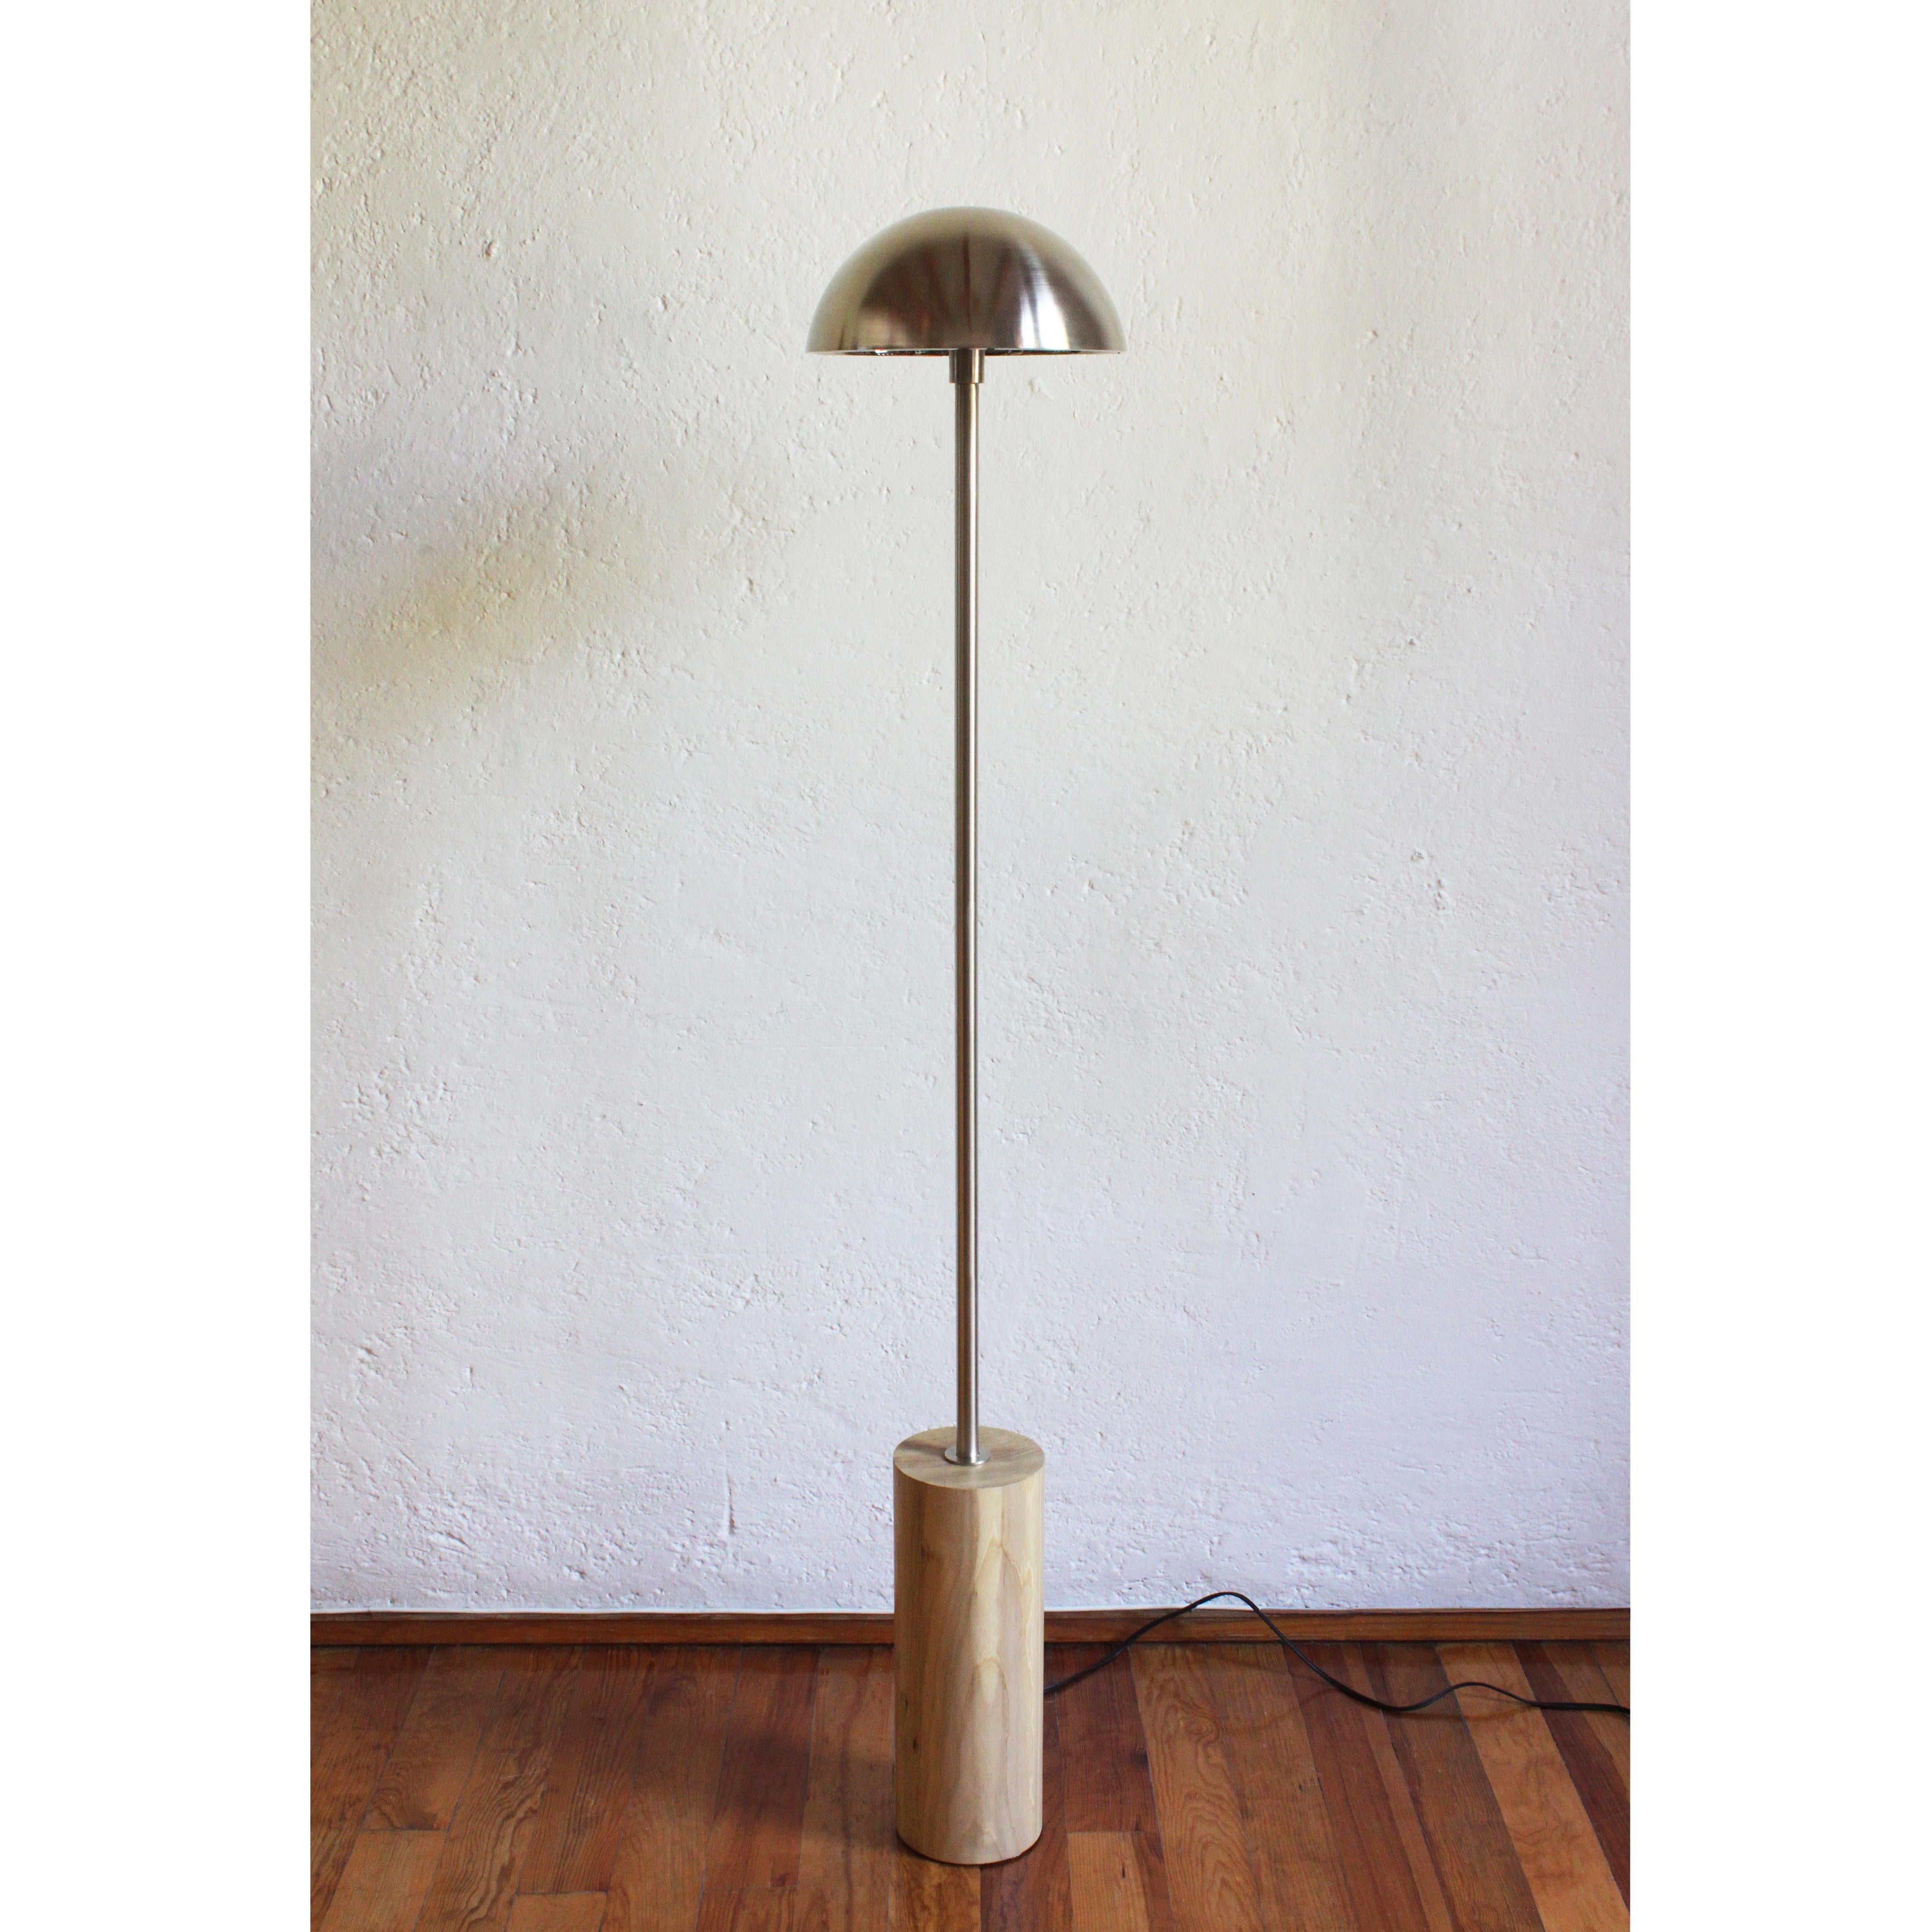 DE PIE ABAJO is a dimmable floor lamp with dimmer in cable. The solid steel structure is covered in electrostatic metal finish. The base of this lamp is designed with internal steel counterweight. Matte finish.

Measures: Dome H 15cm x W 30cm x D